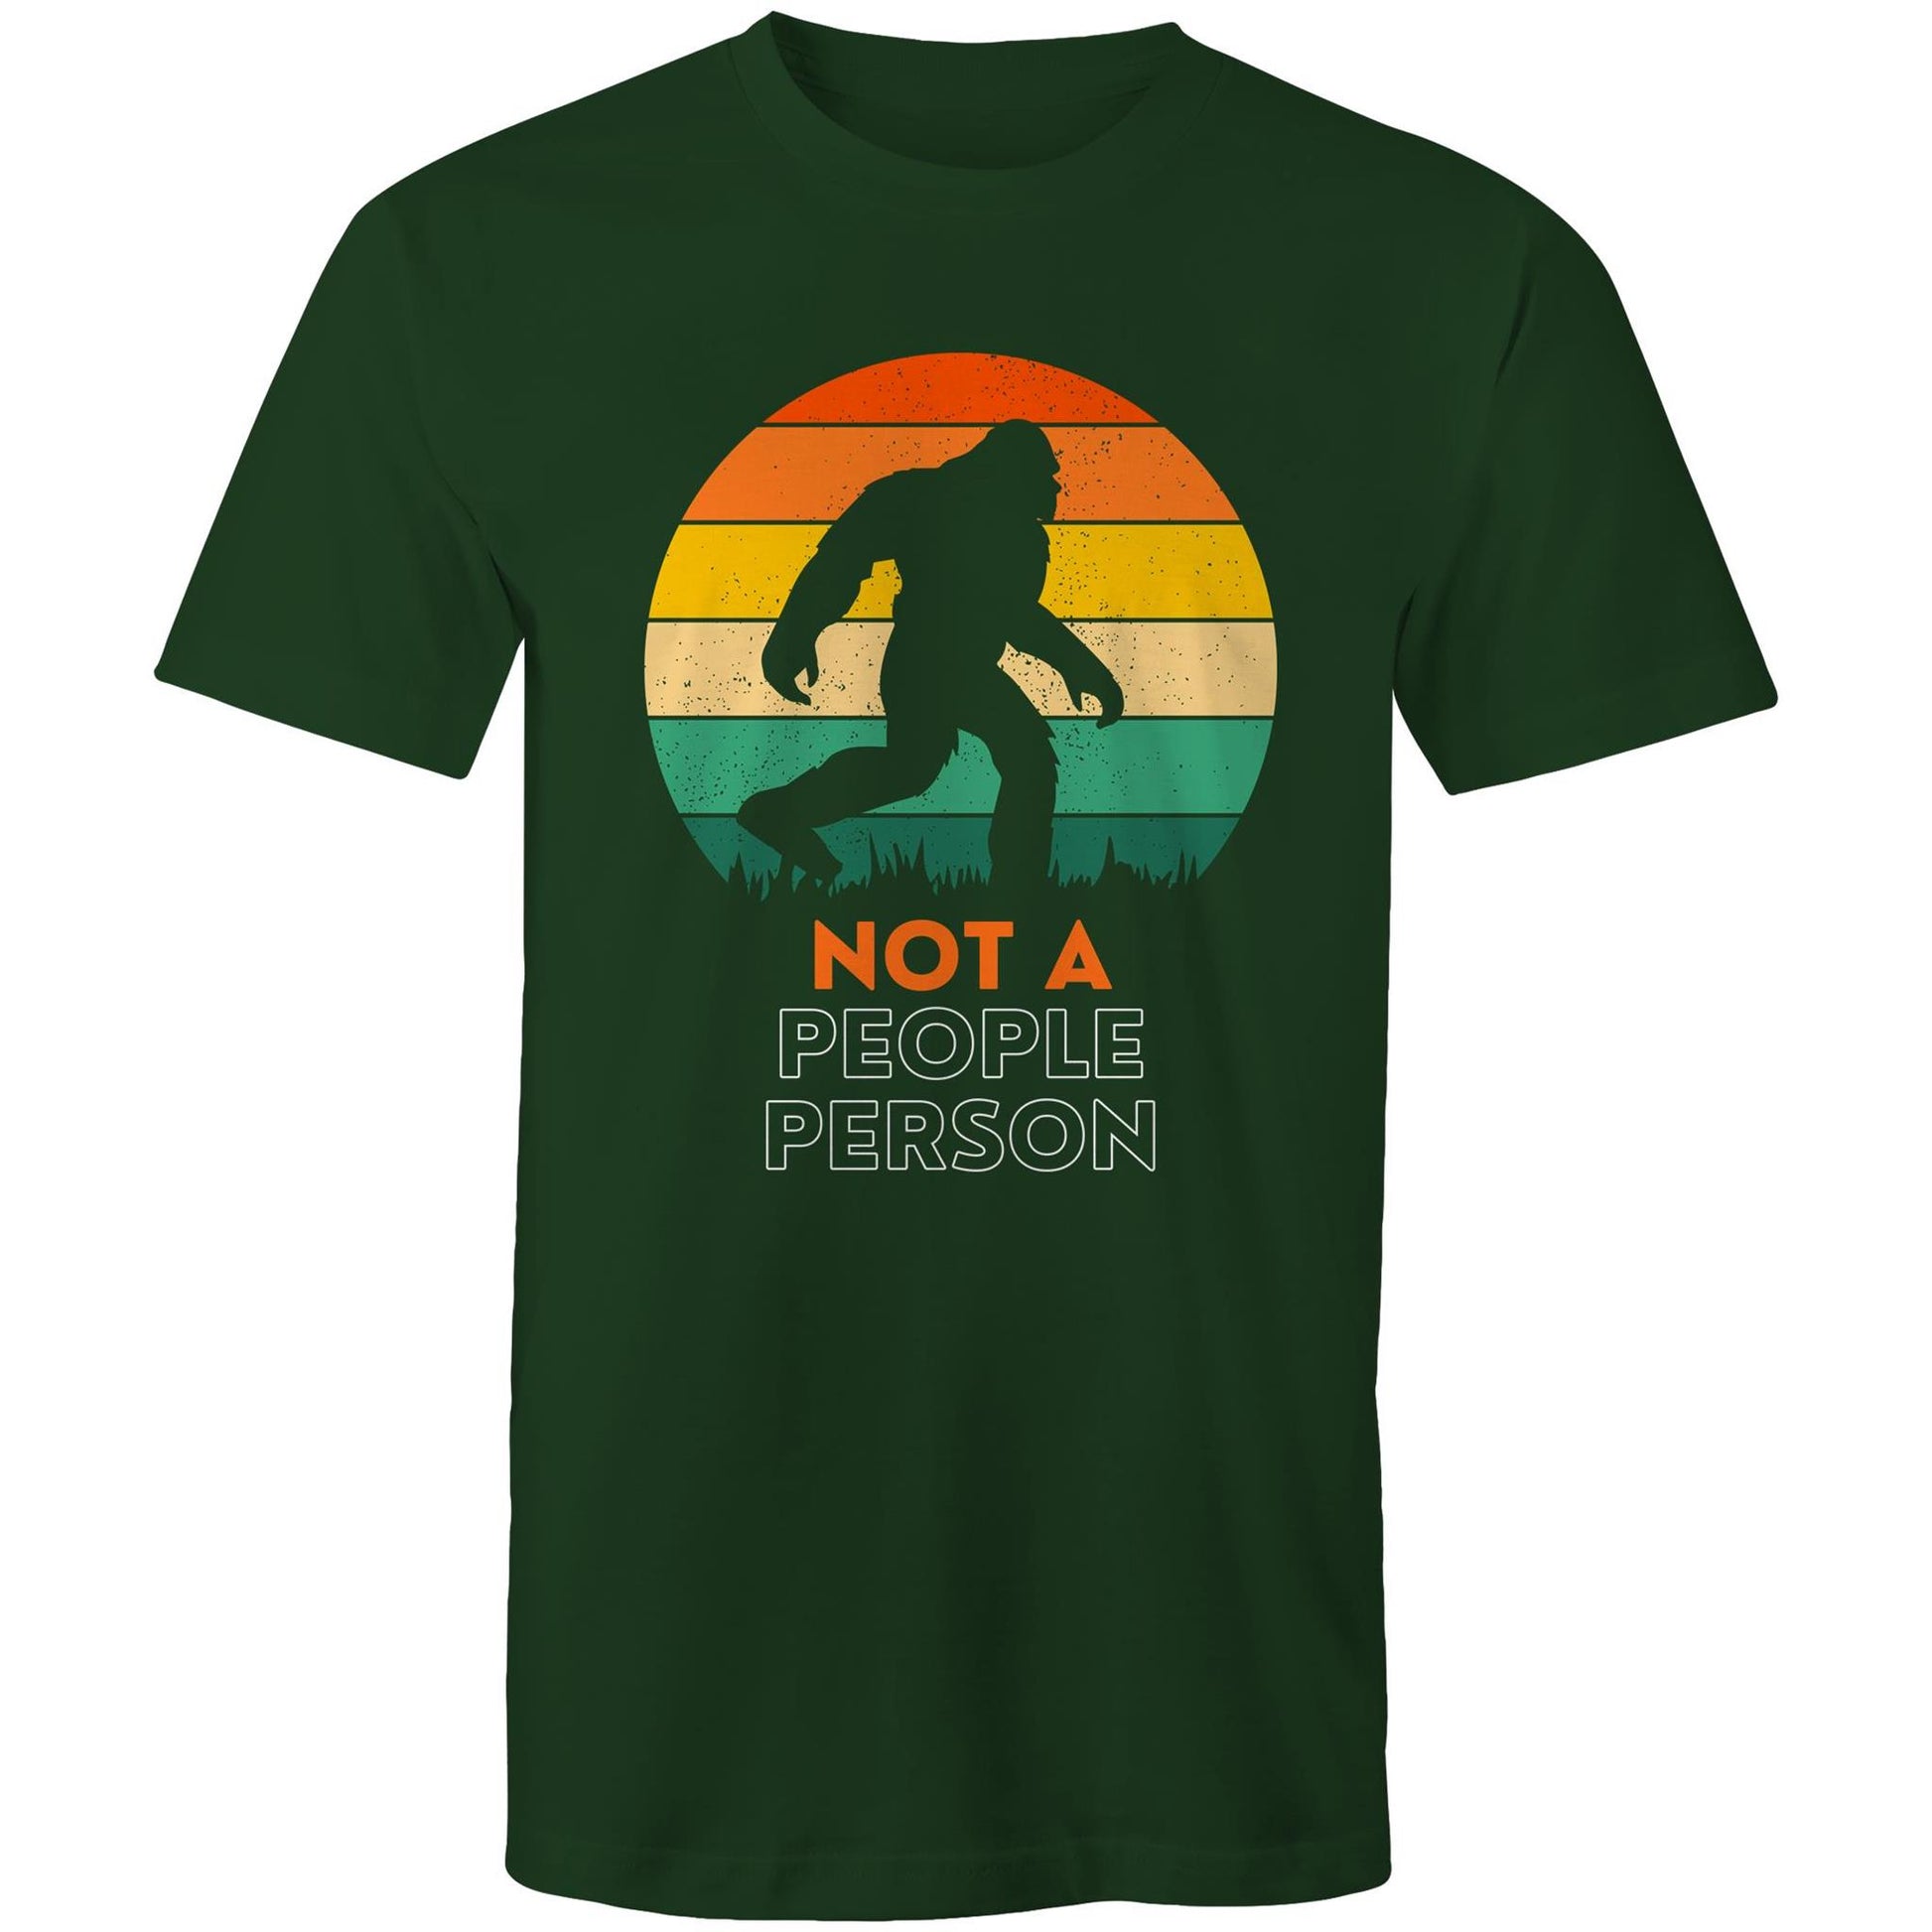 Not A People Person, Big Foot, Sasquatch, Yeti - Mens T-Shirt Forest Green Mens T-shirt Funny